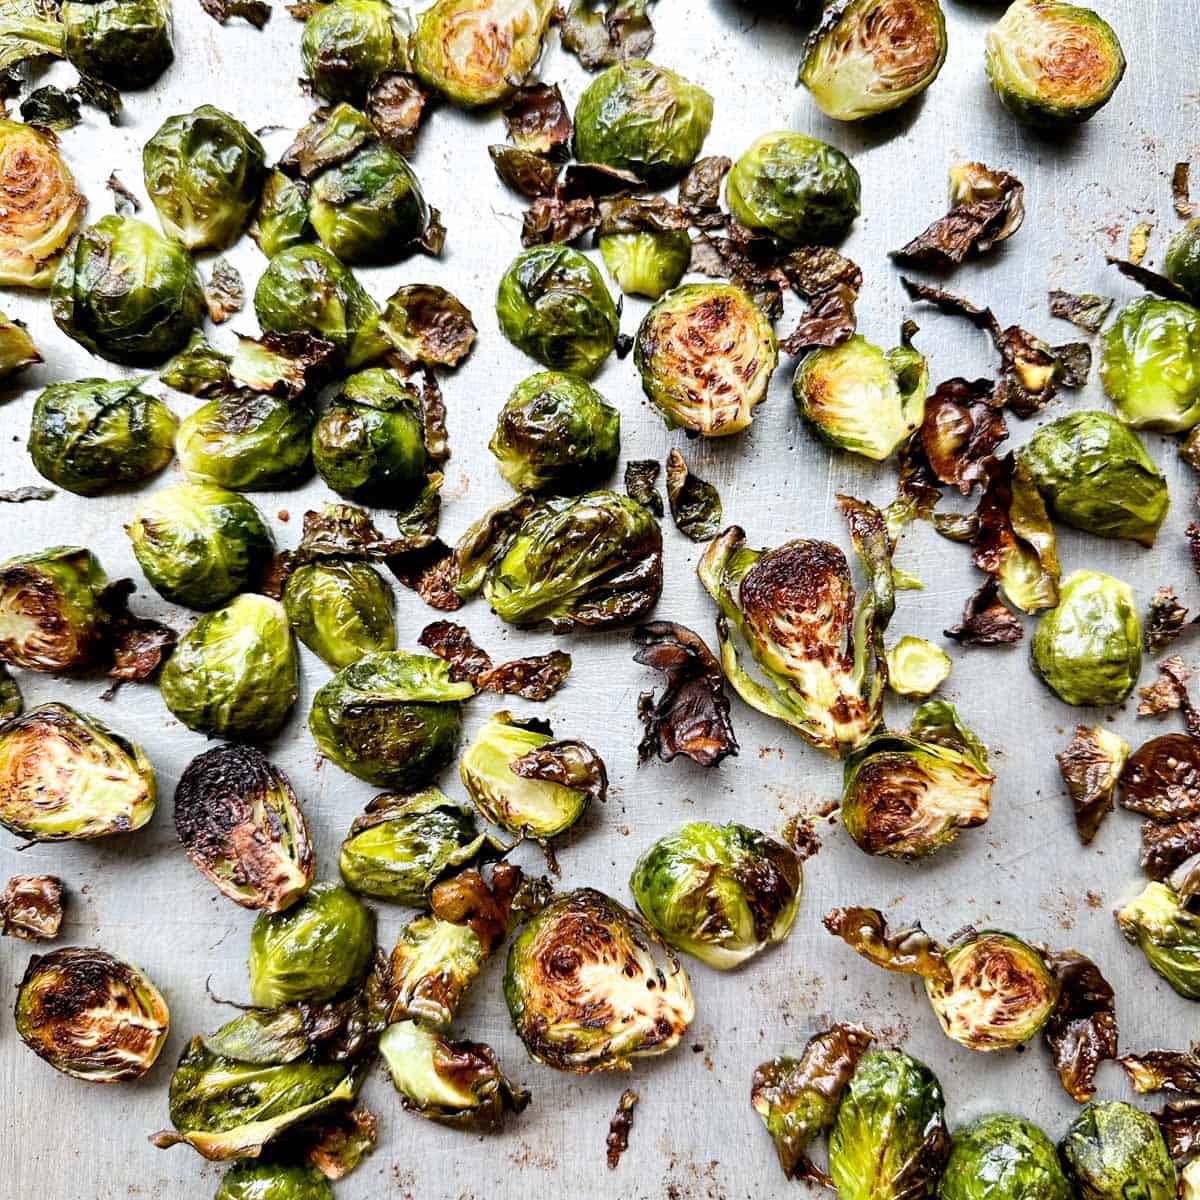 Roasted Brussels sprouts on a sheet tray.